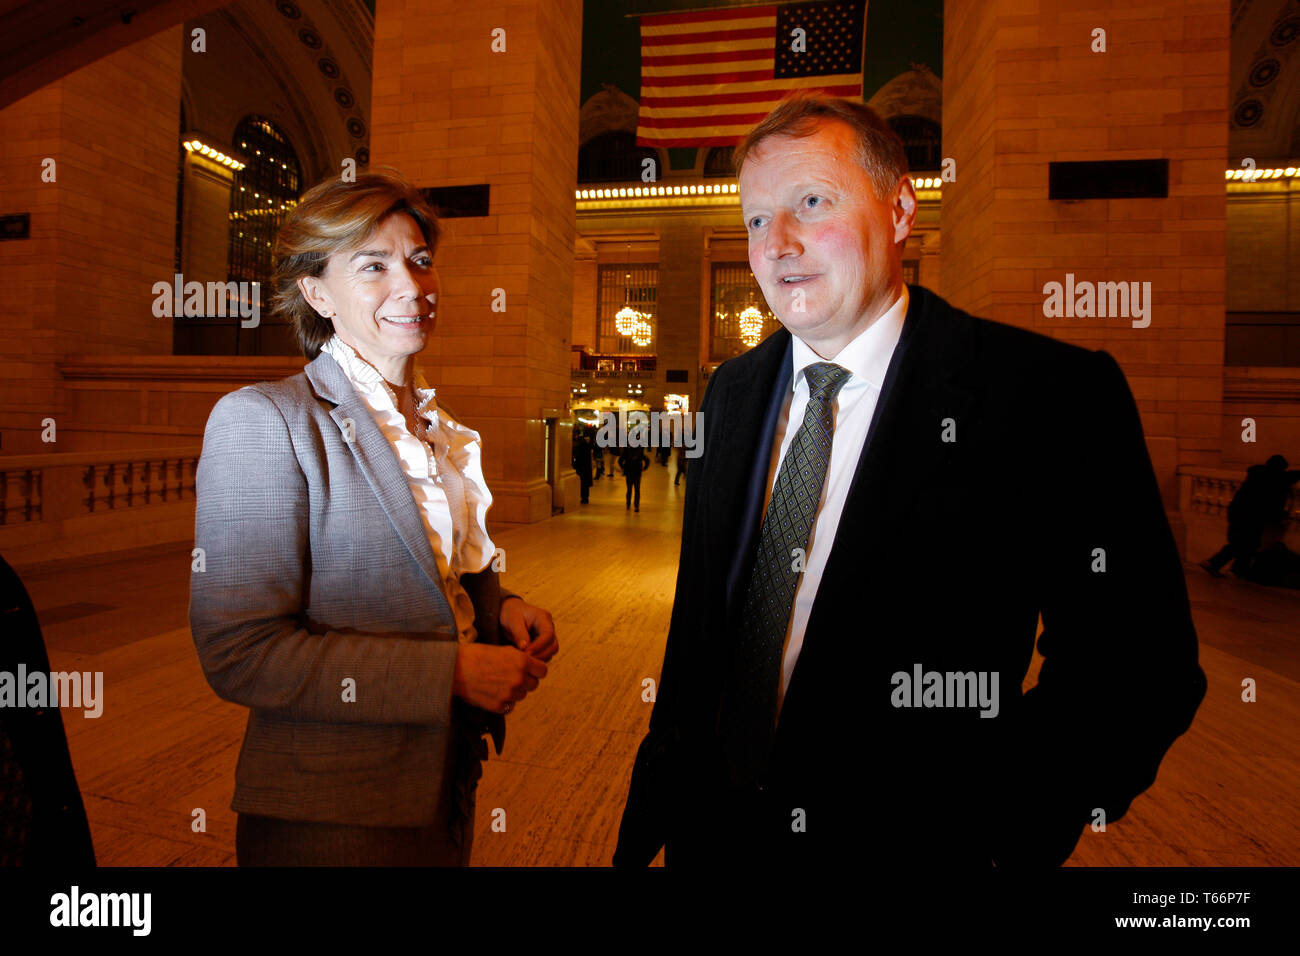 Global Head of Ocean Industries DNB ASA Kristin Holth and CEO of the Norwegian Bank DNB Rune Bjerke in New York. Stock Photo